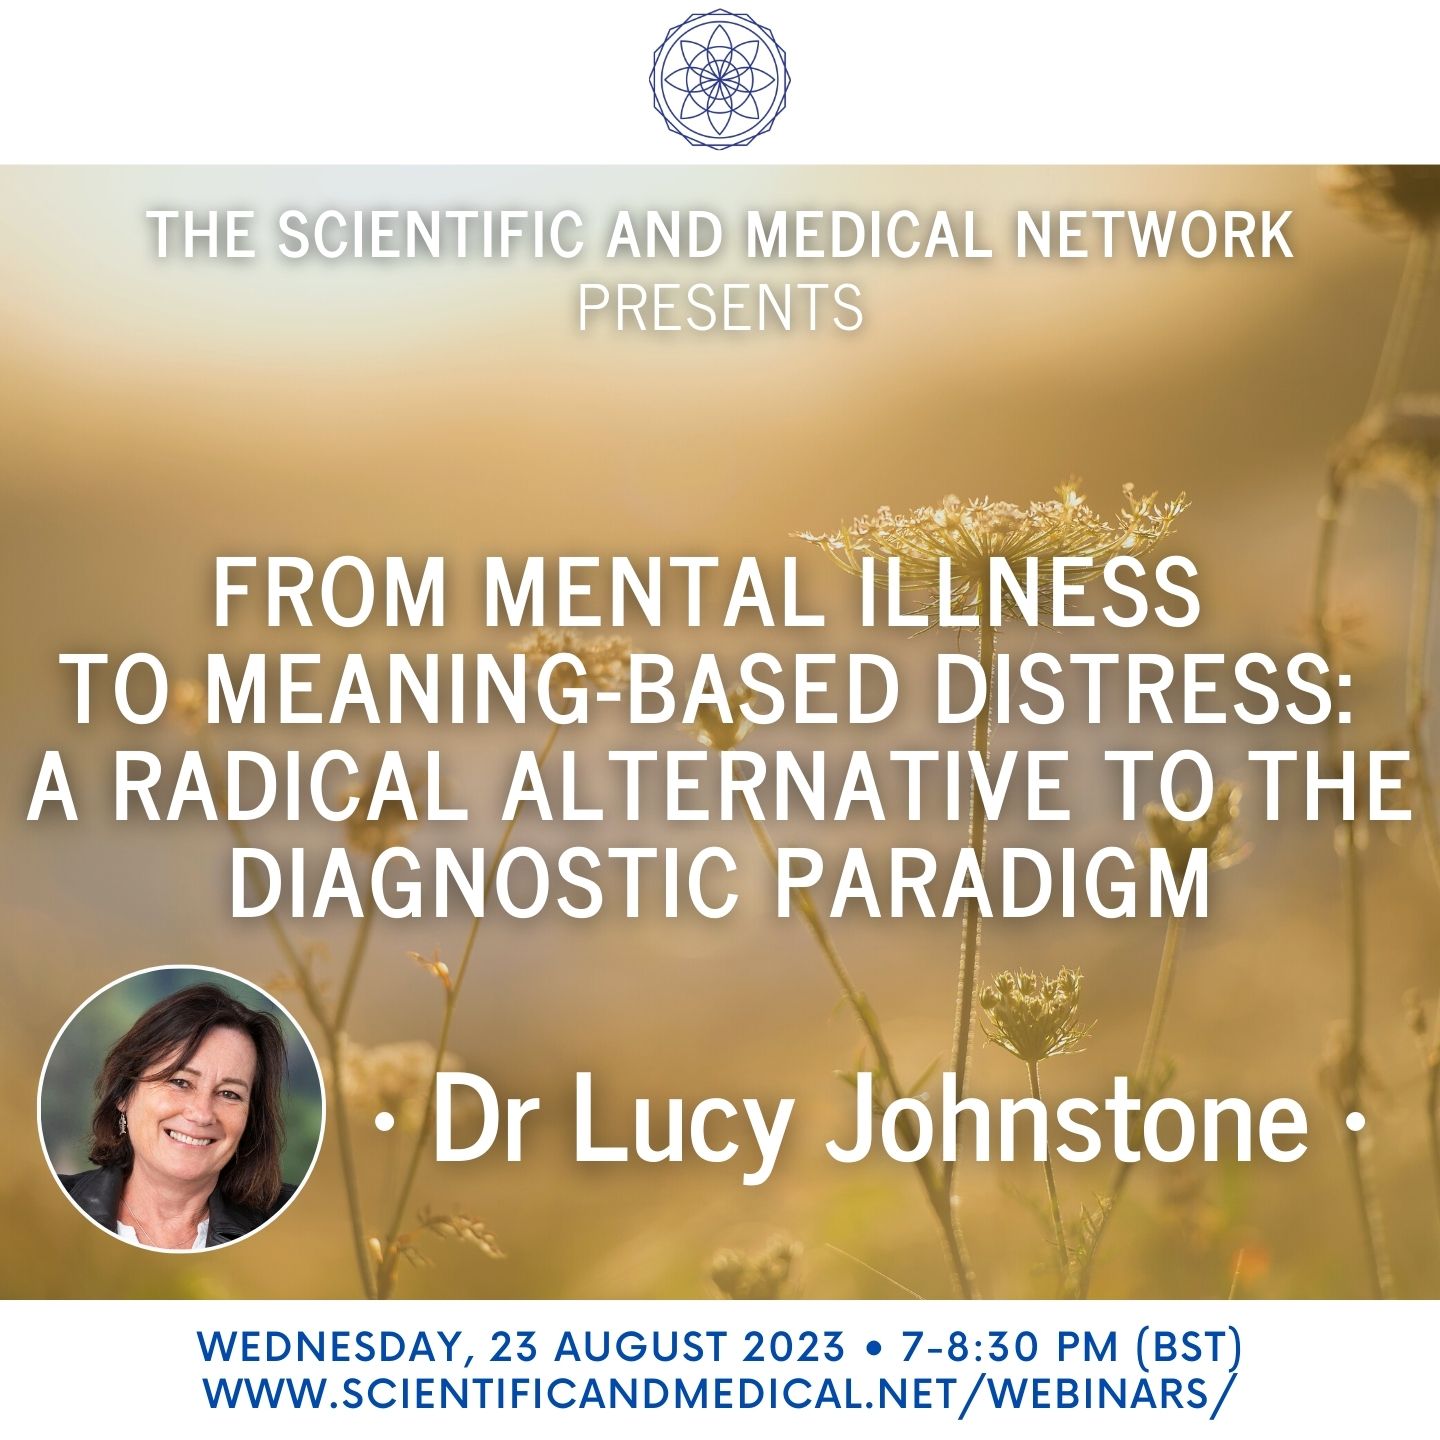 Dr Lucy Johnstone From Mental Illness to Meaning Based Distress A Radical Alternative to the Diagnostic Paradigm